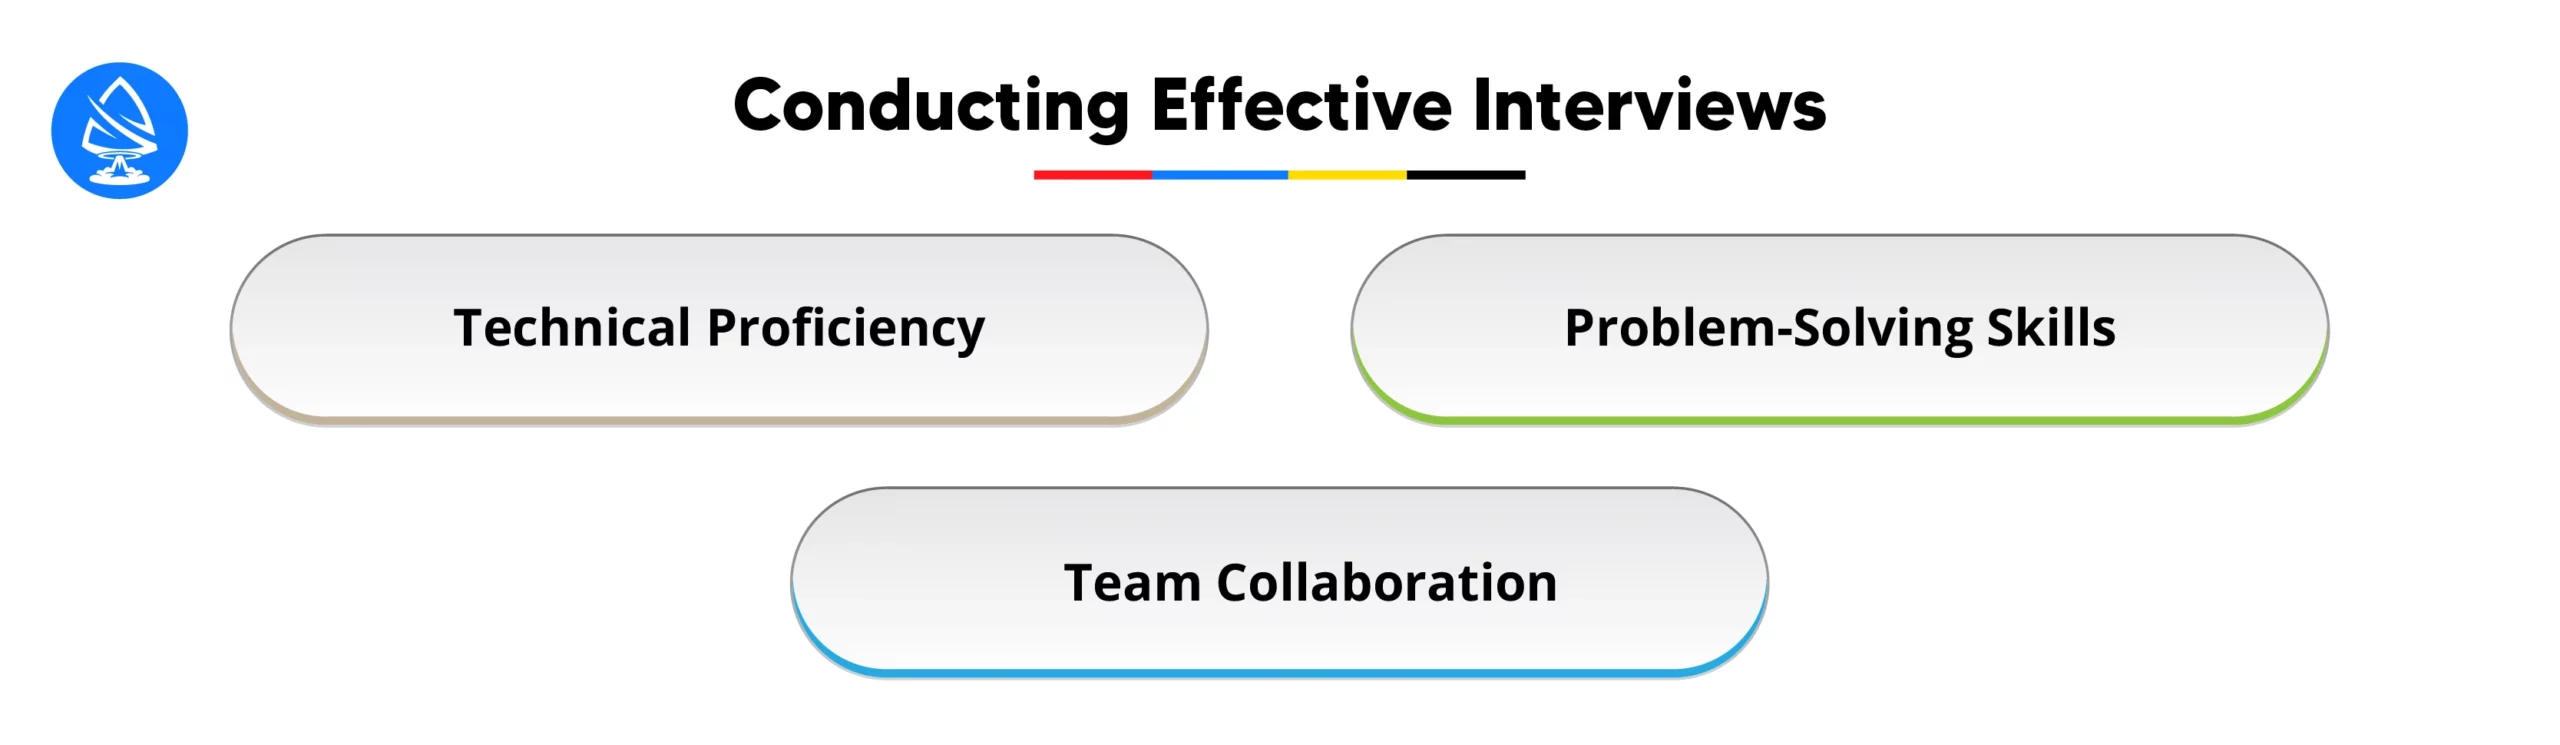 Conducting Effective Interviews